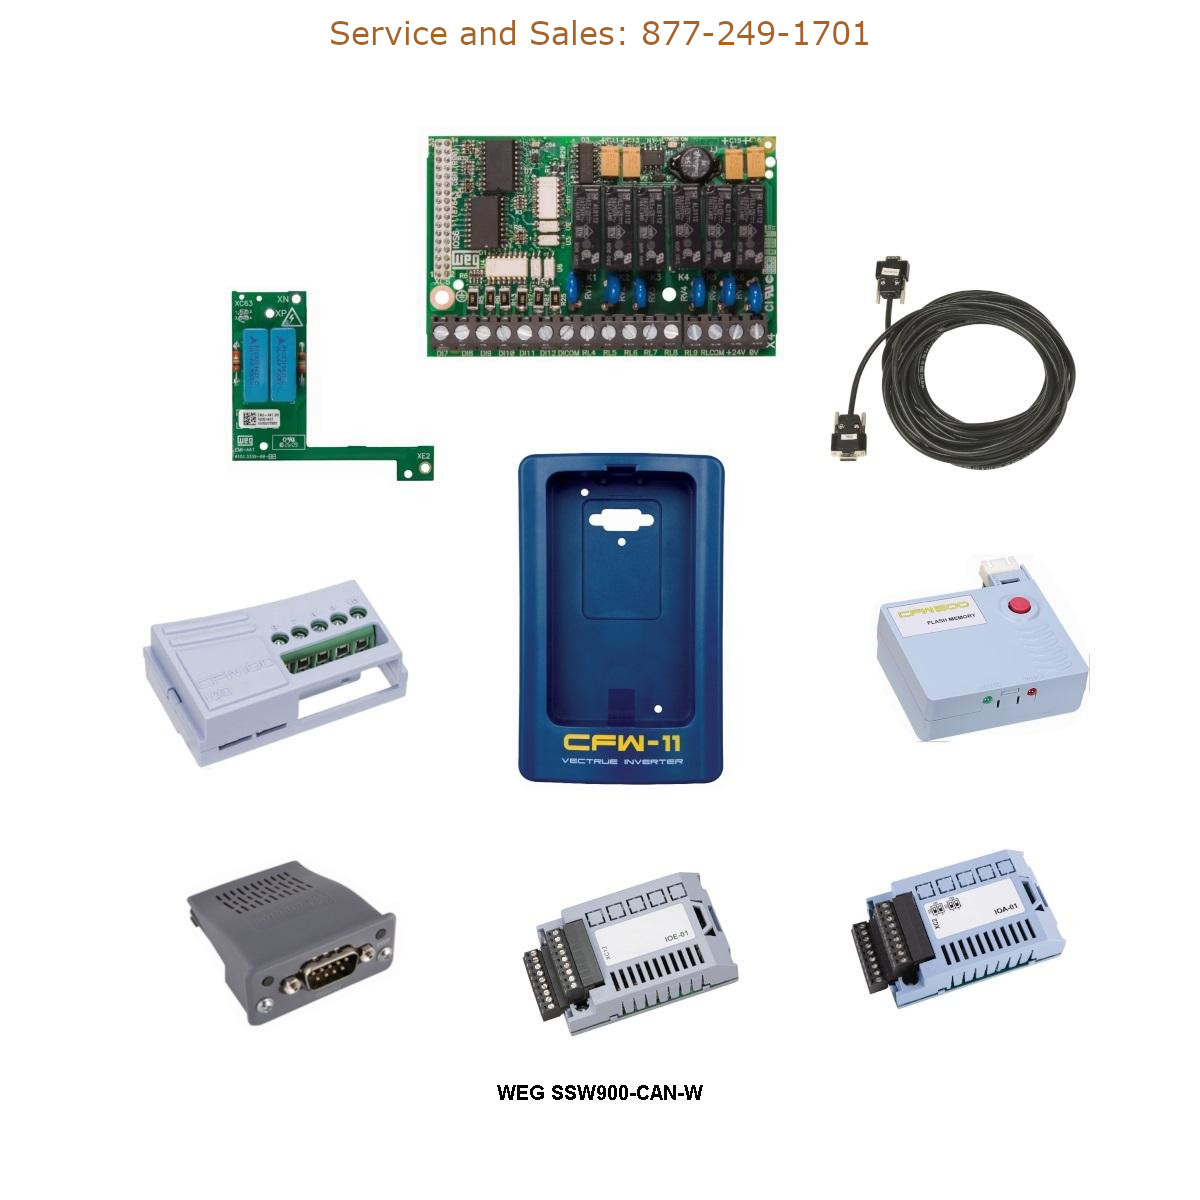 WEG SSW900-CAN-W WEG Model Number SSW900-CAN-W WEG Drives, Accessories for Drives Repair Service, Troubleshooting, Replacement Parts https://gesrepair.com/wp-content/uploads/2022/WEG/WEG_SSW900-CAN-W_Drives_Accessories_for_Drives.jpg